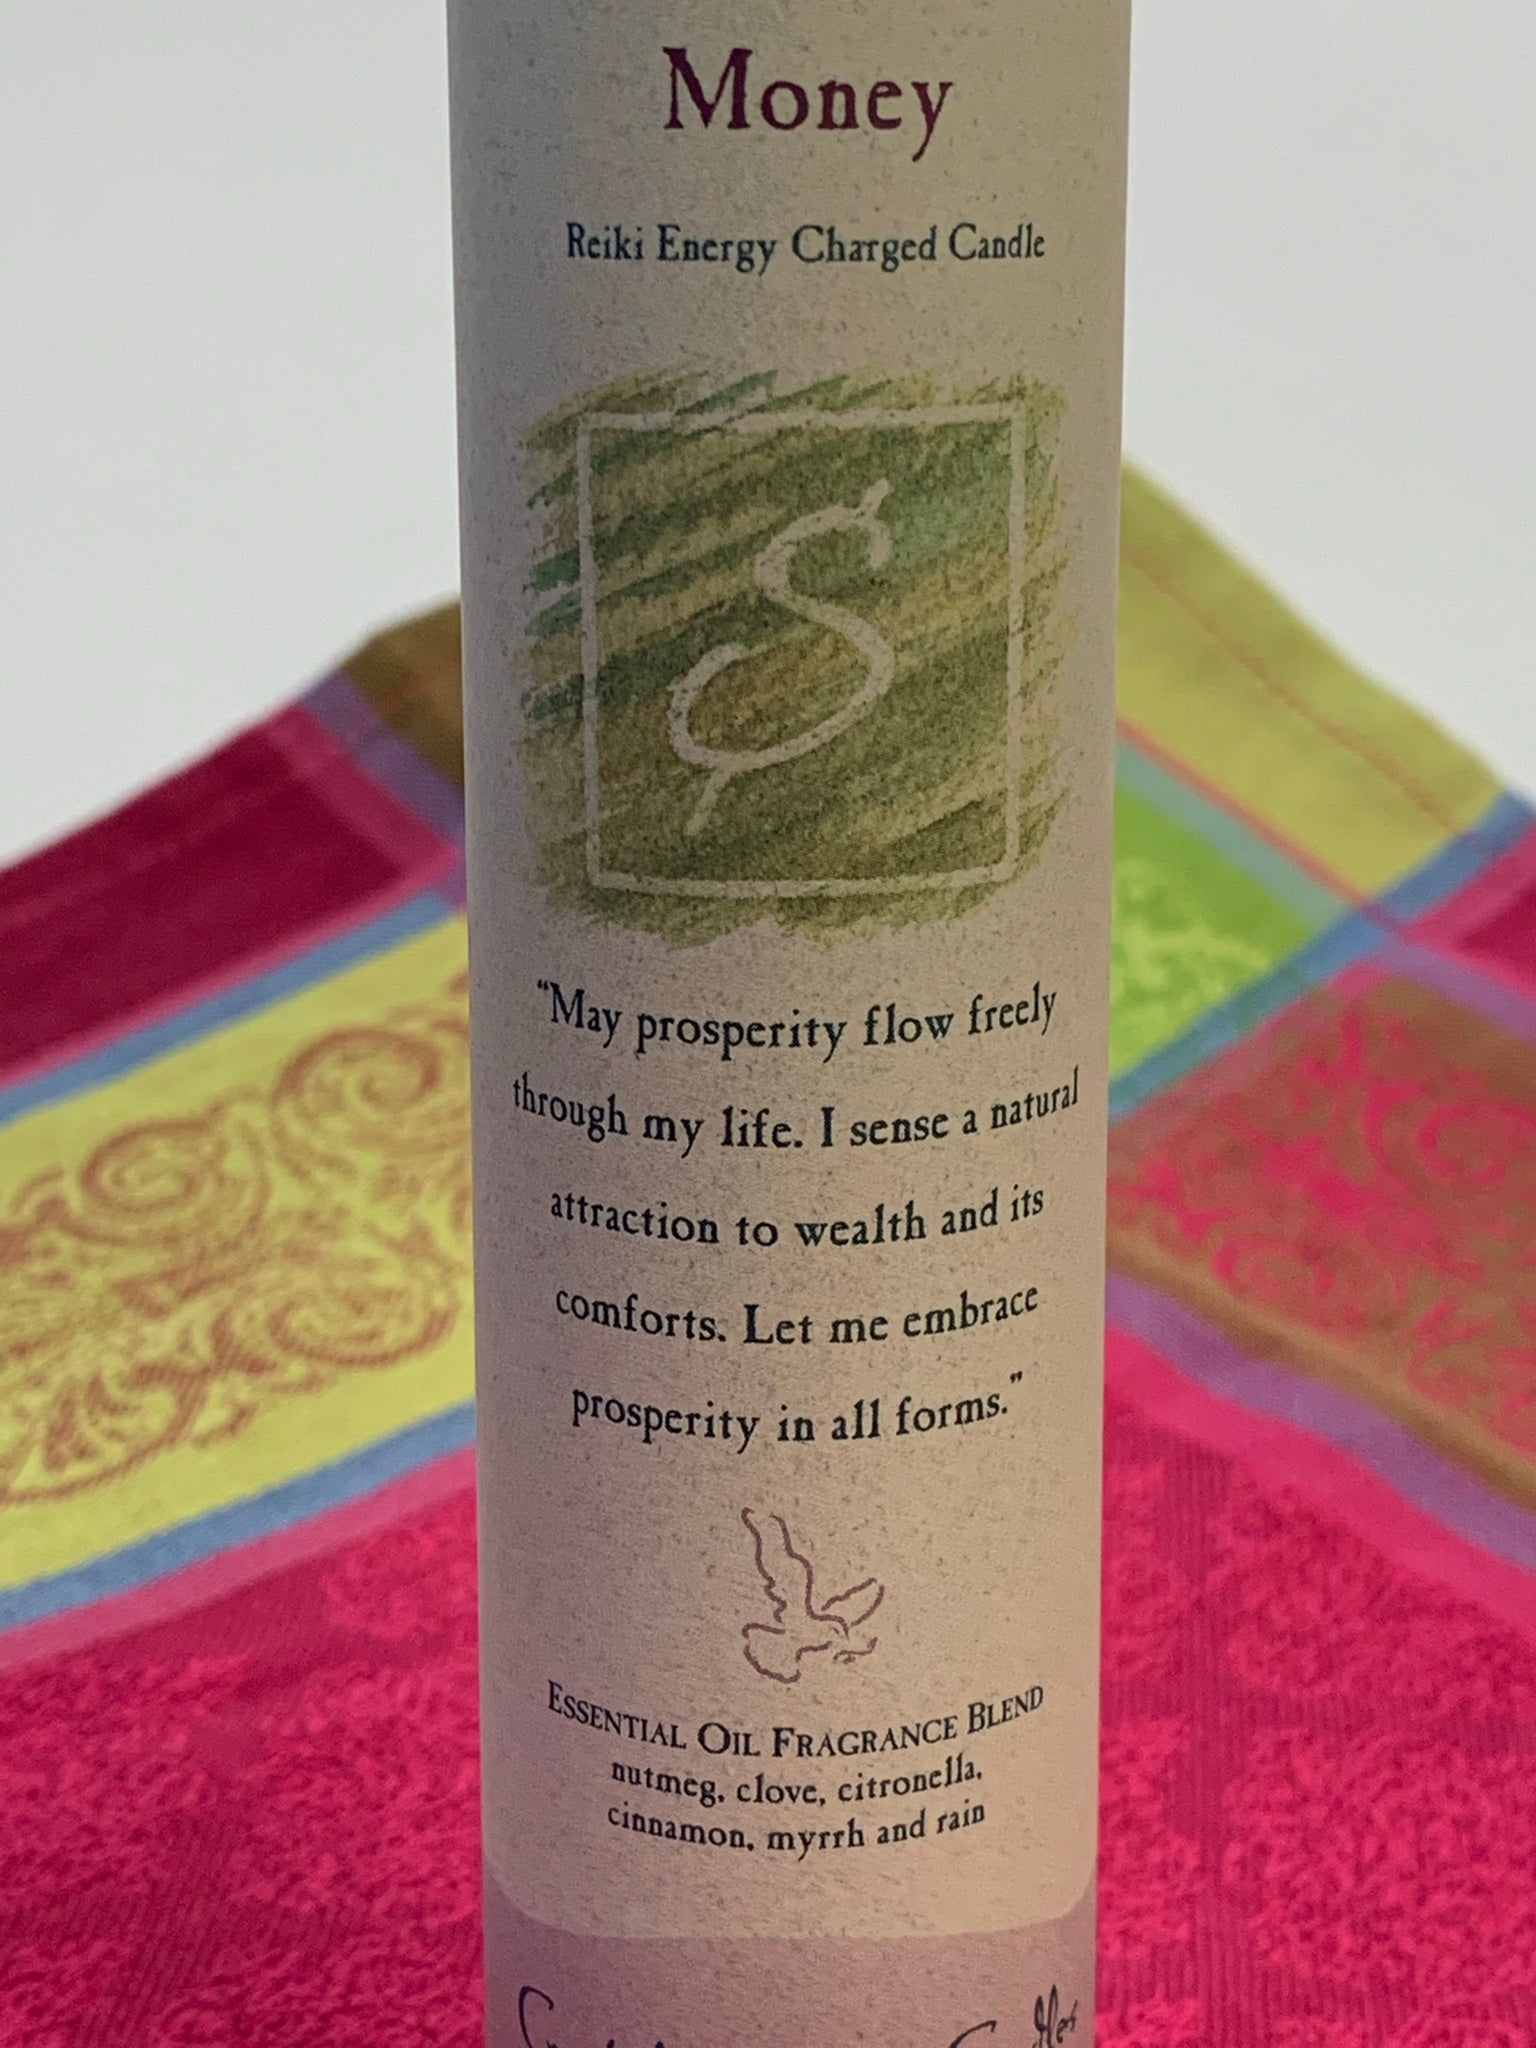 Close-up view of the Reiki-charged pillar candle energized for manifesting "money." It is handcrafted and scented using essential oils. An affirmation/prayer is printed on the label, as well as a listing of the essential oils used (nutmeg, clove, citronella, cinnamon, myrrh, rain). It is approximately 7"x2½". Perfect for meditation, prayer, visualization or quiet time. This green candle and its label are both visually appealing.